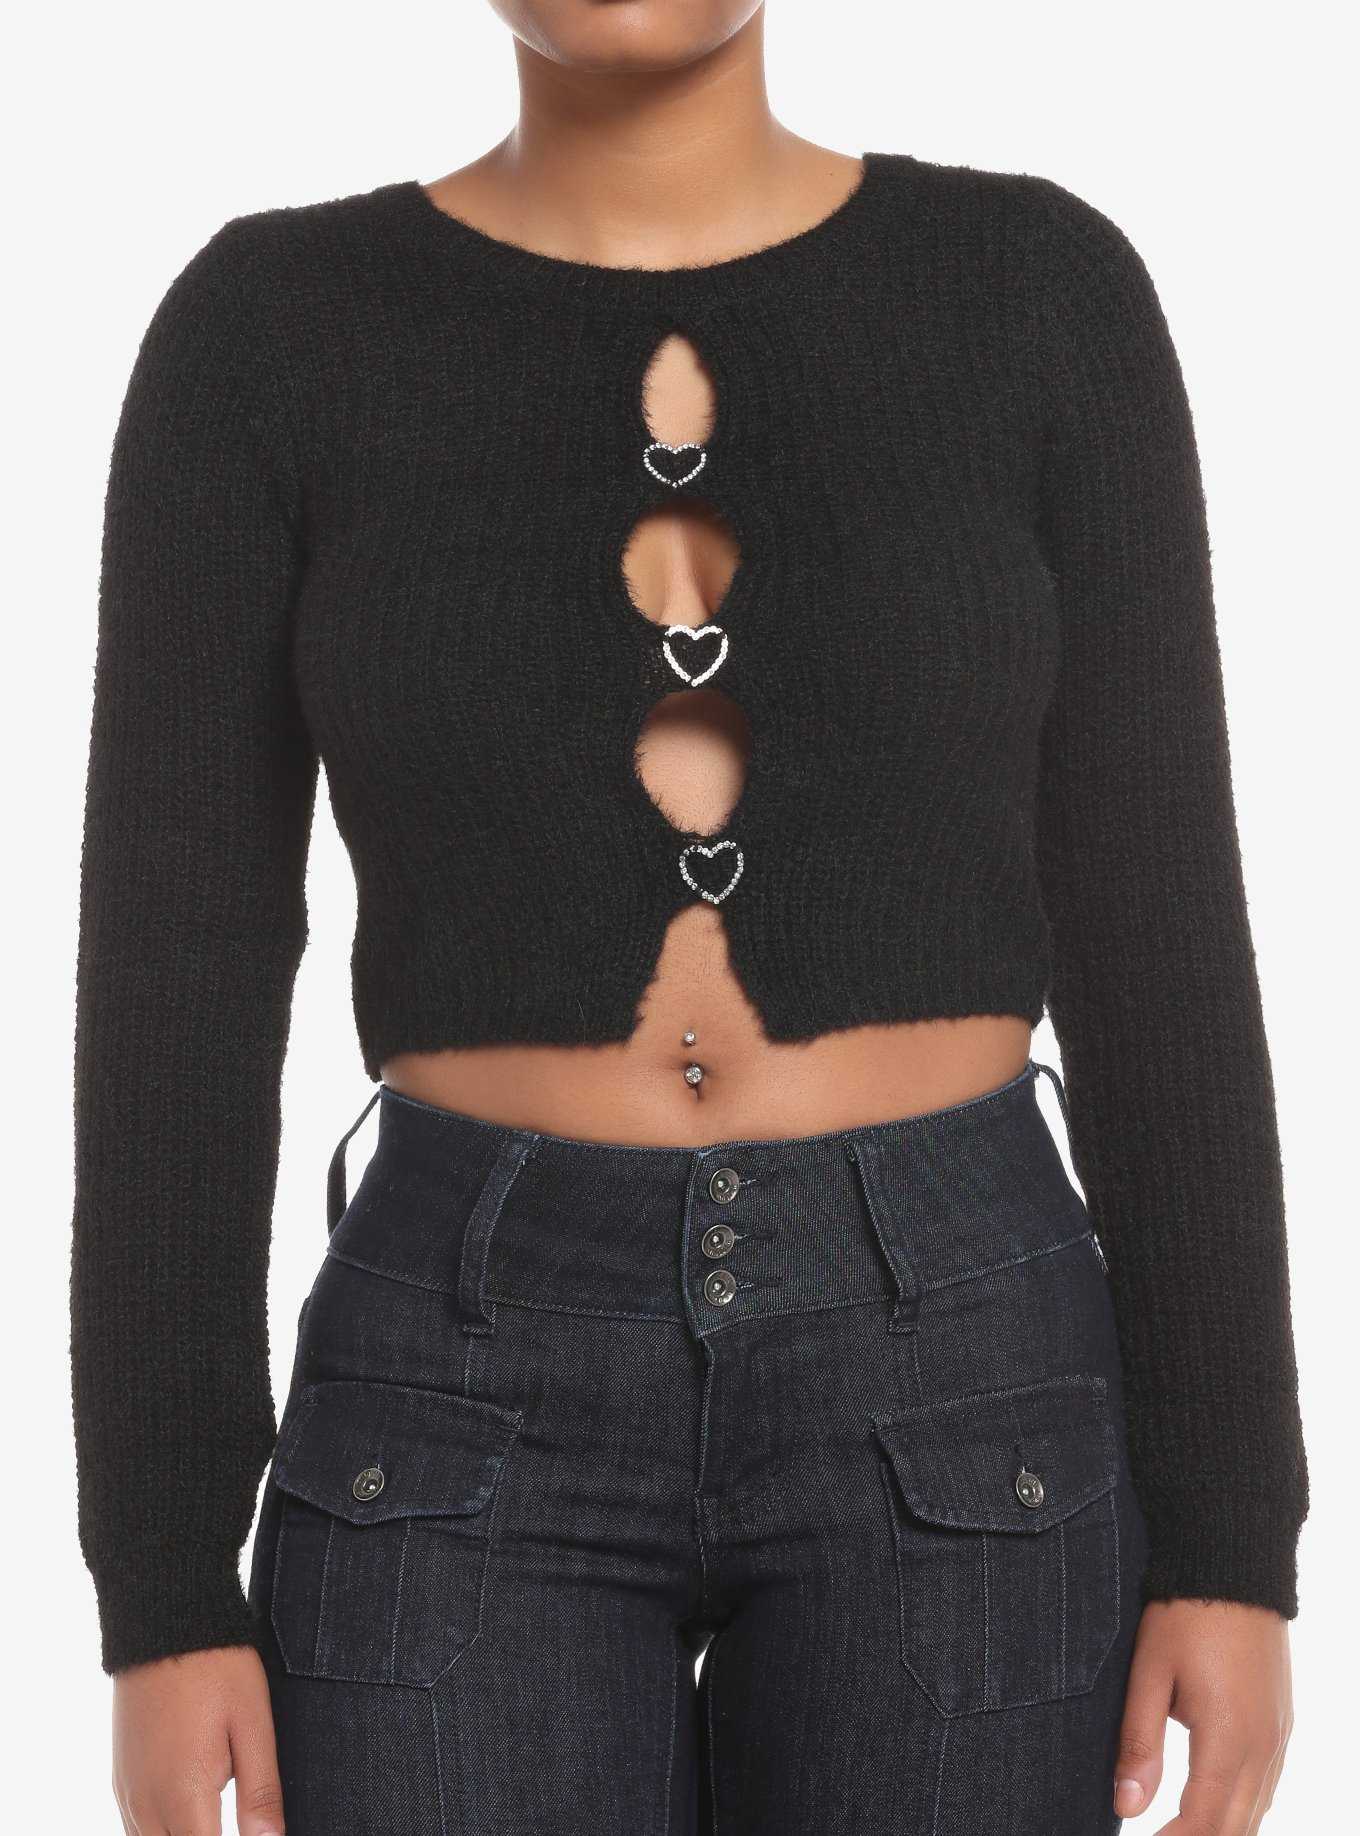 Black Fuzzy Heart Bling Cut-Out Girls Crop Sweater, , hi-res